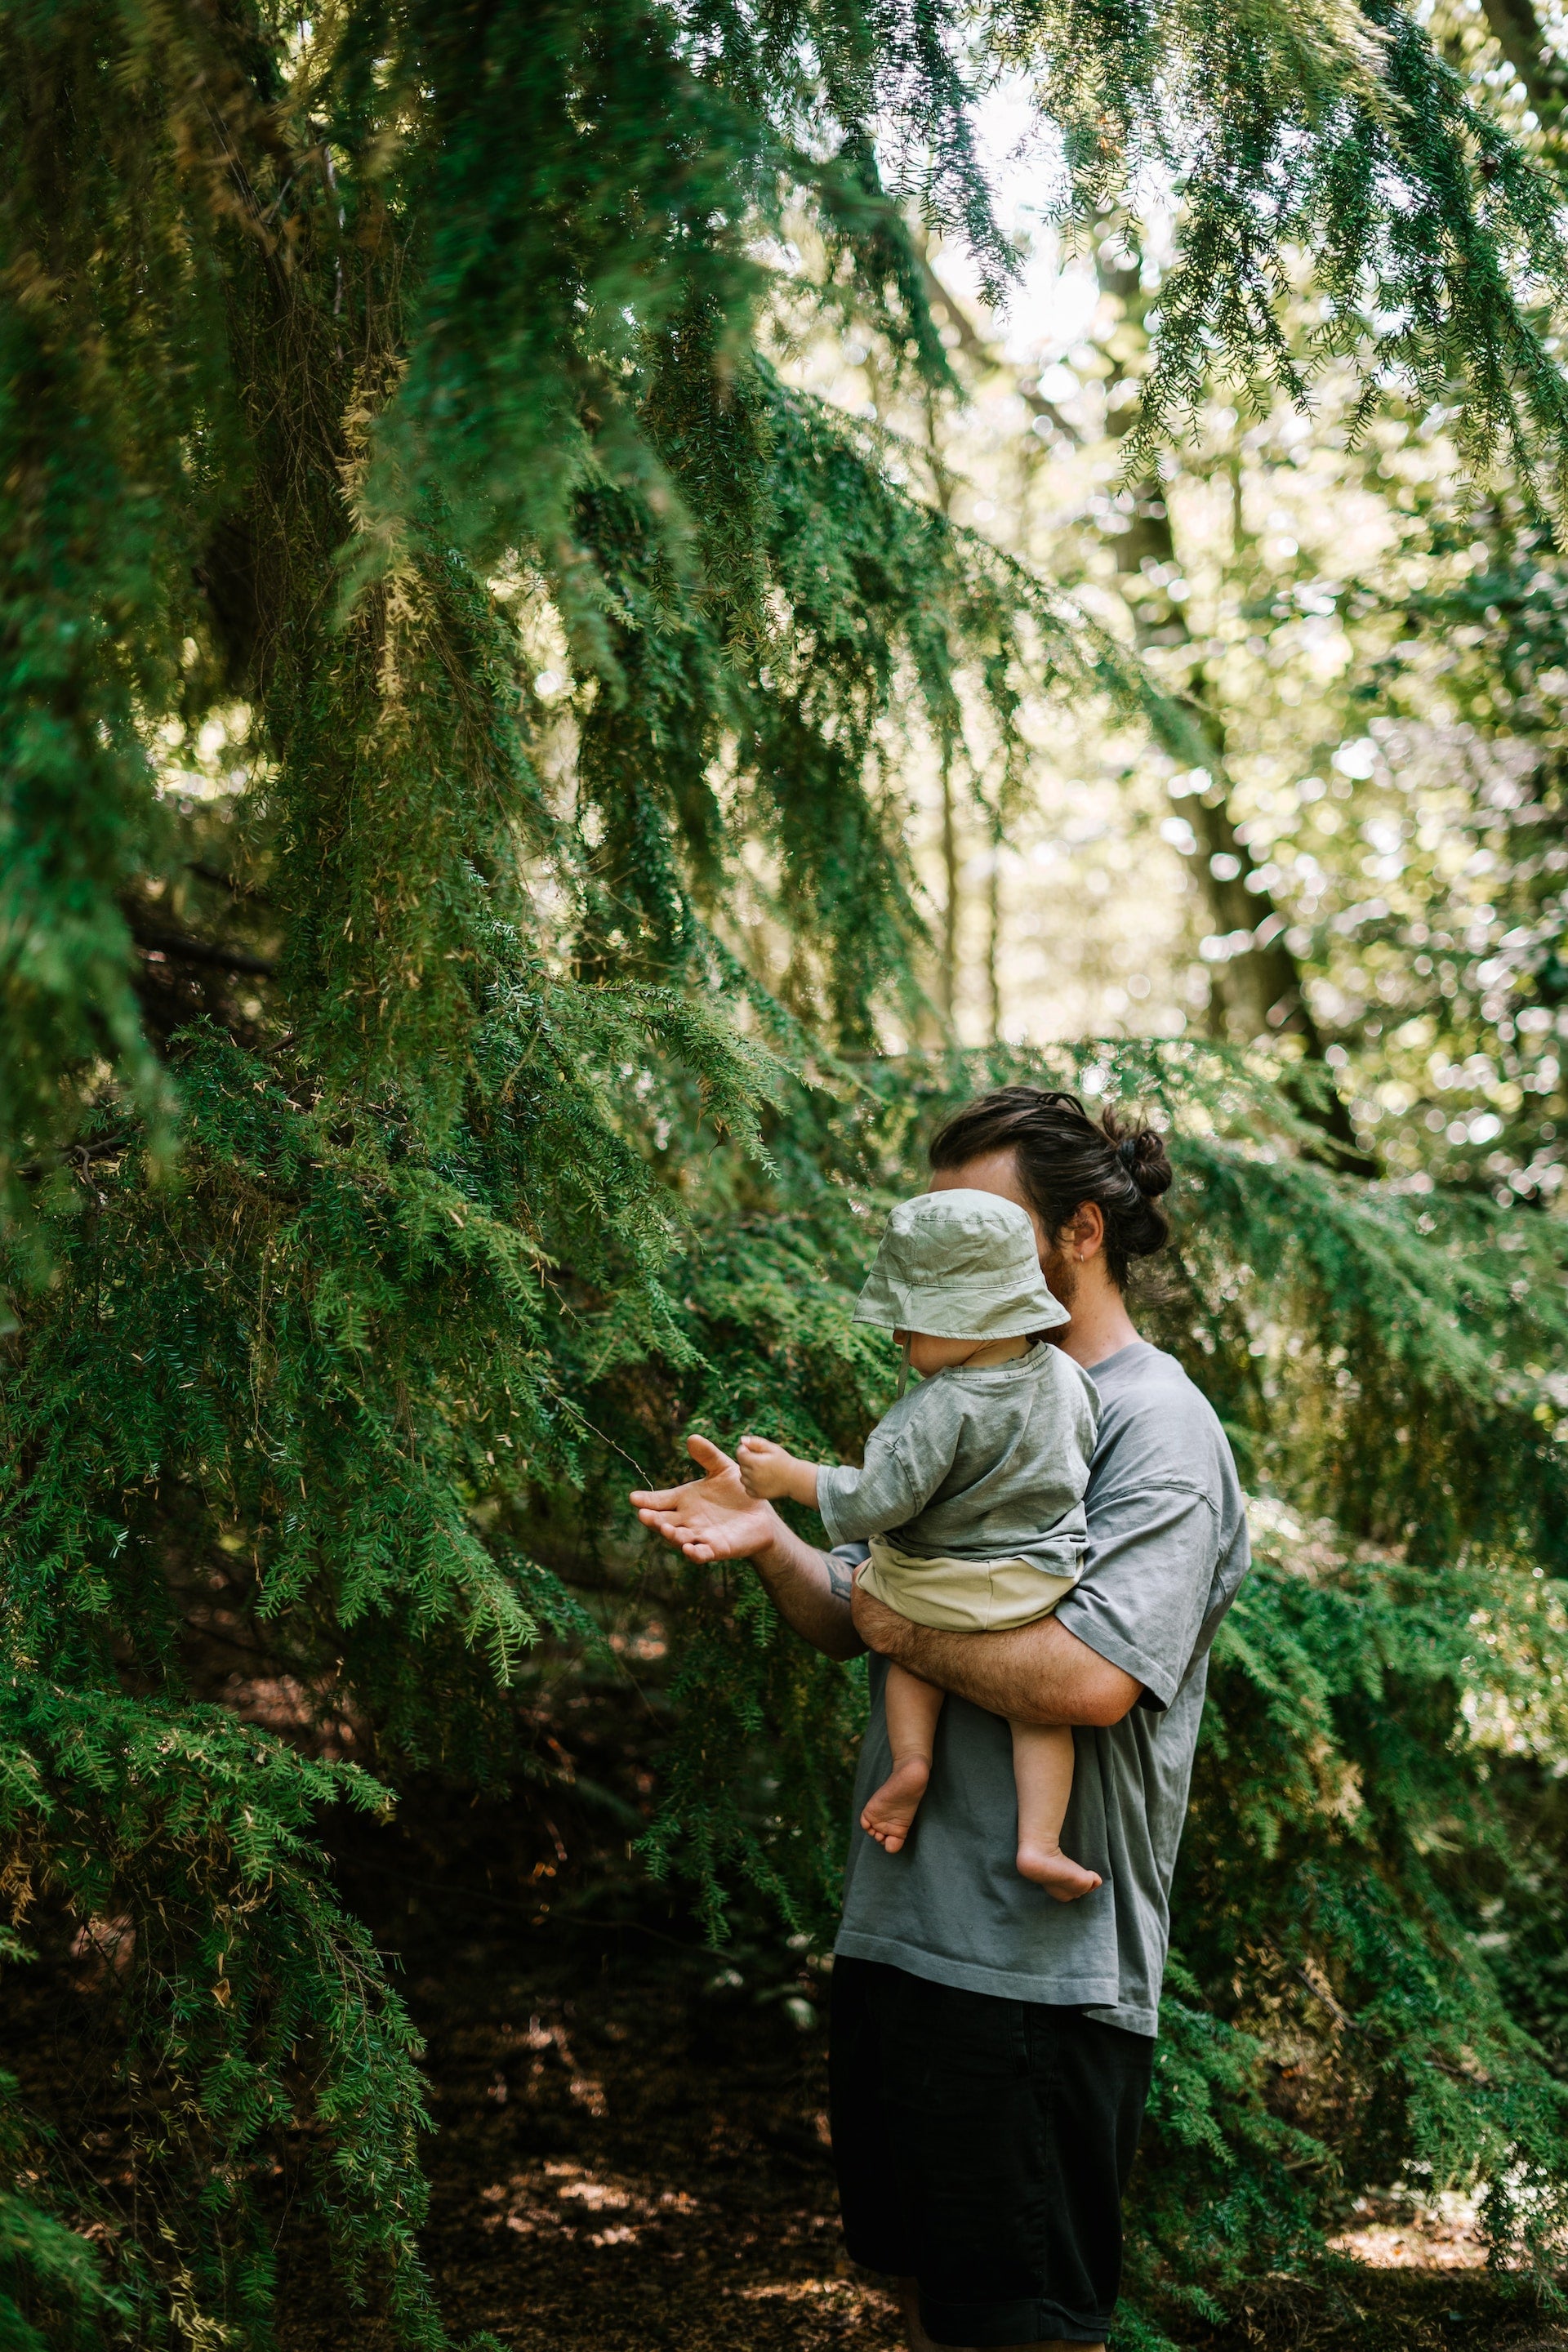 Man with long hair holding a baby while walking through the forest